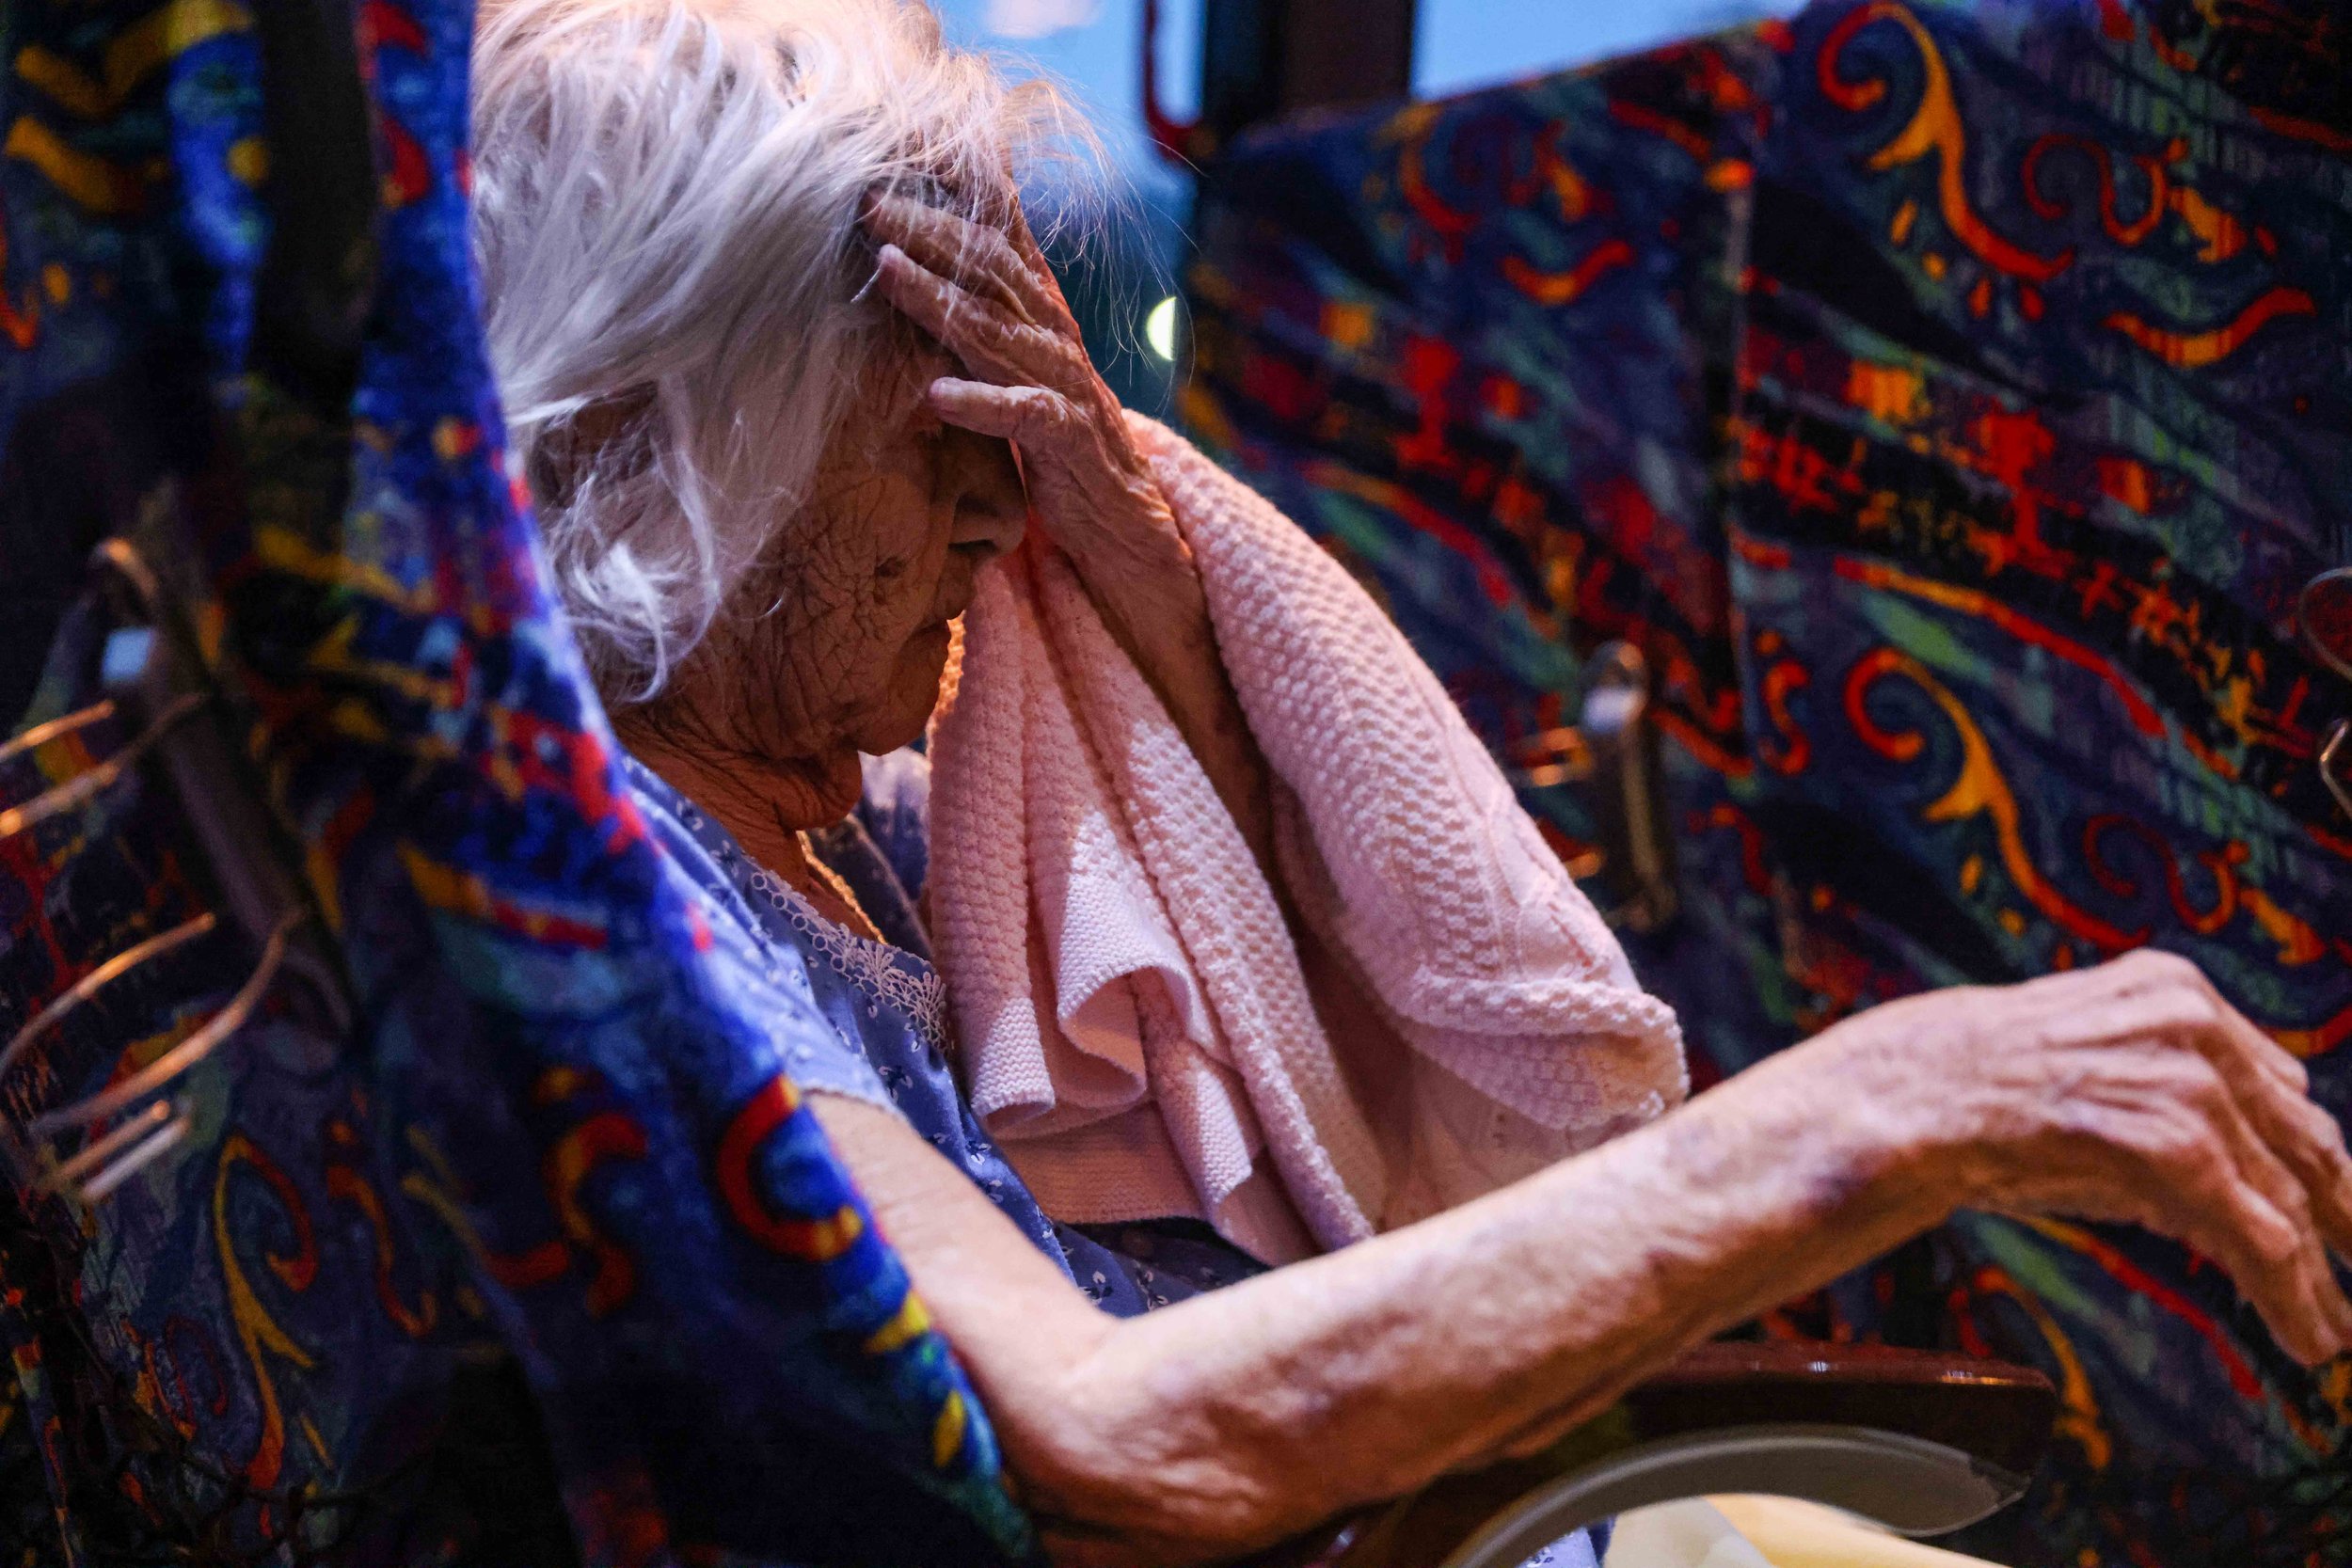  Maria Barajas, who is 100 years old and suffers from severe dementia, prepares to spend the night on the bus that serves as a warming center located in Pleasant Oaks Recreation Center in Dallas on Wednesday, February 18, 2021, after early Monday the